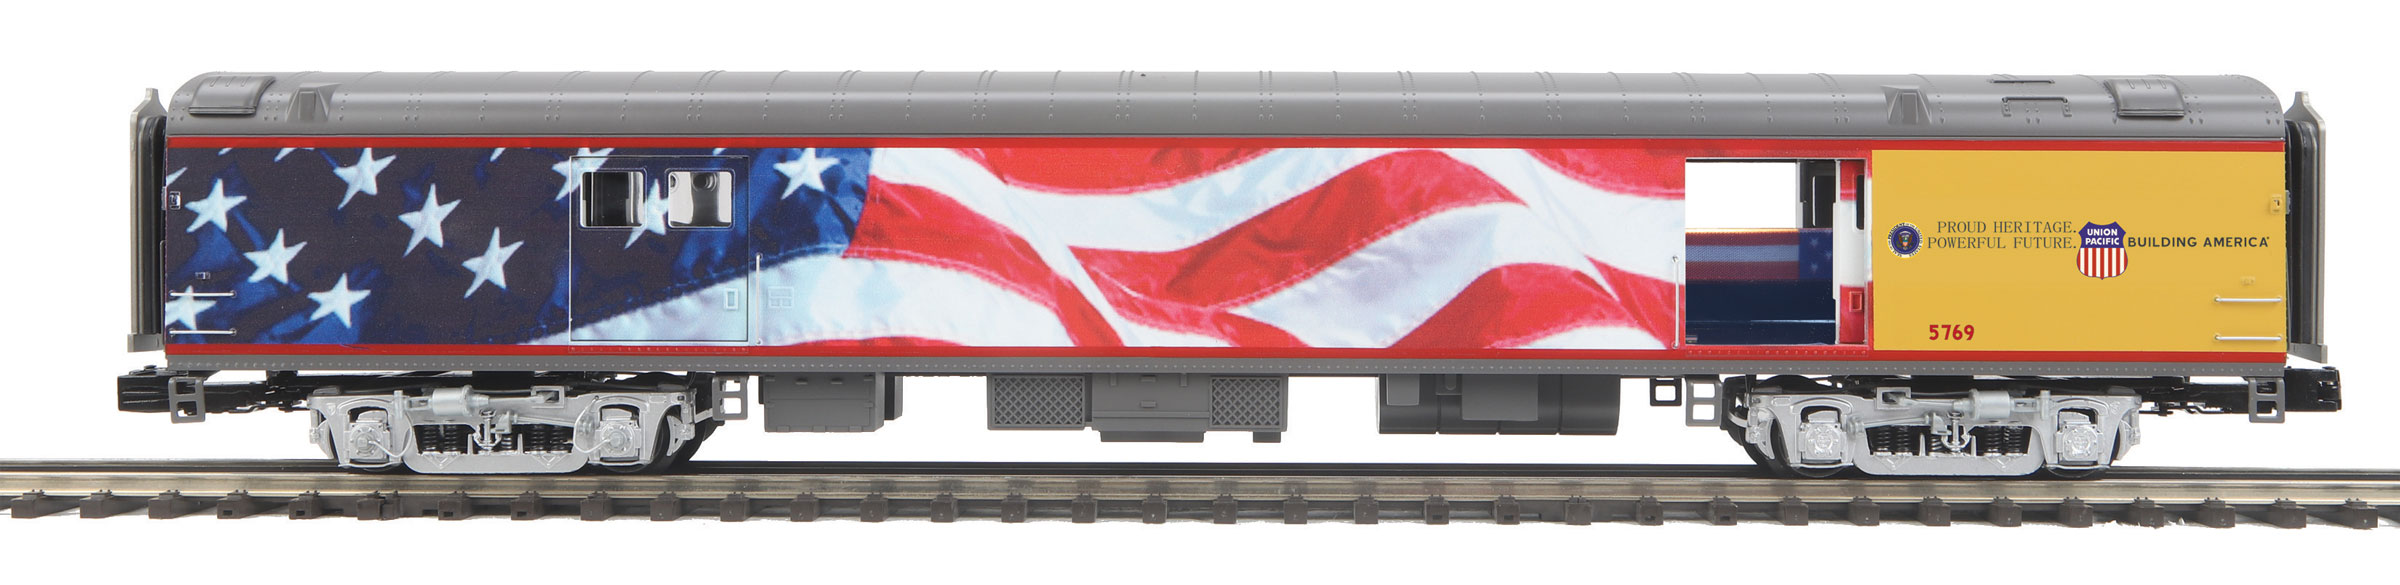 Union Pacific (Flag) 70' ABS Baggage Car (Smooth) image